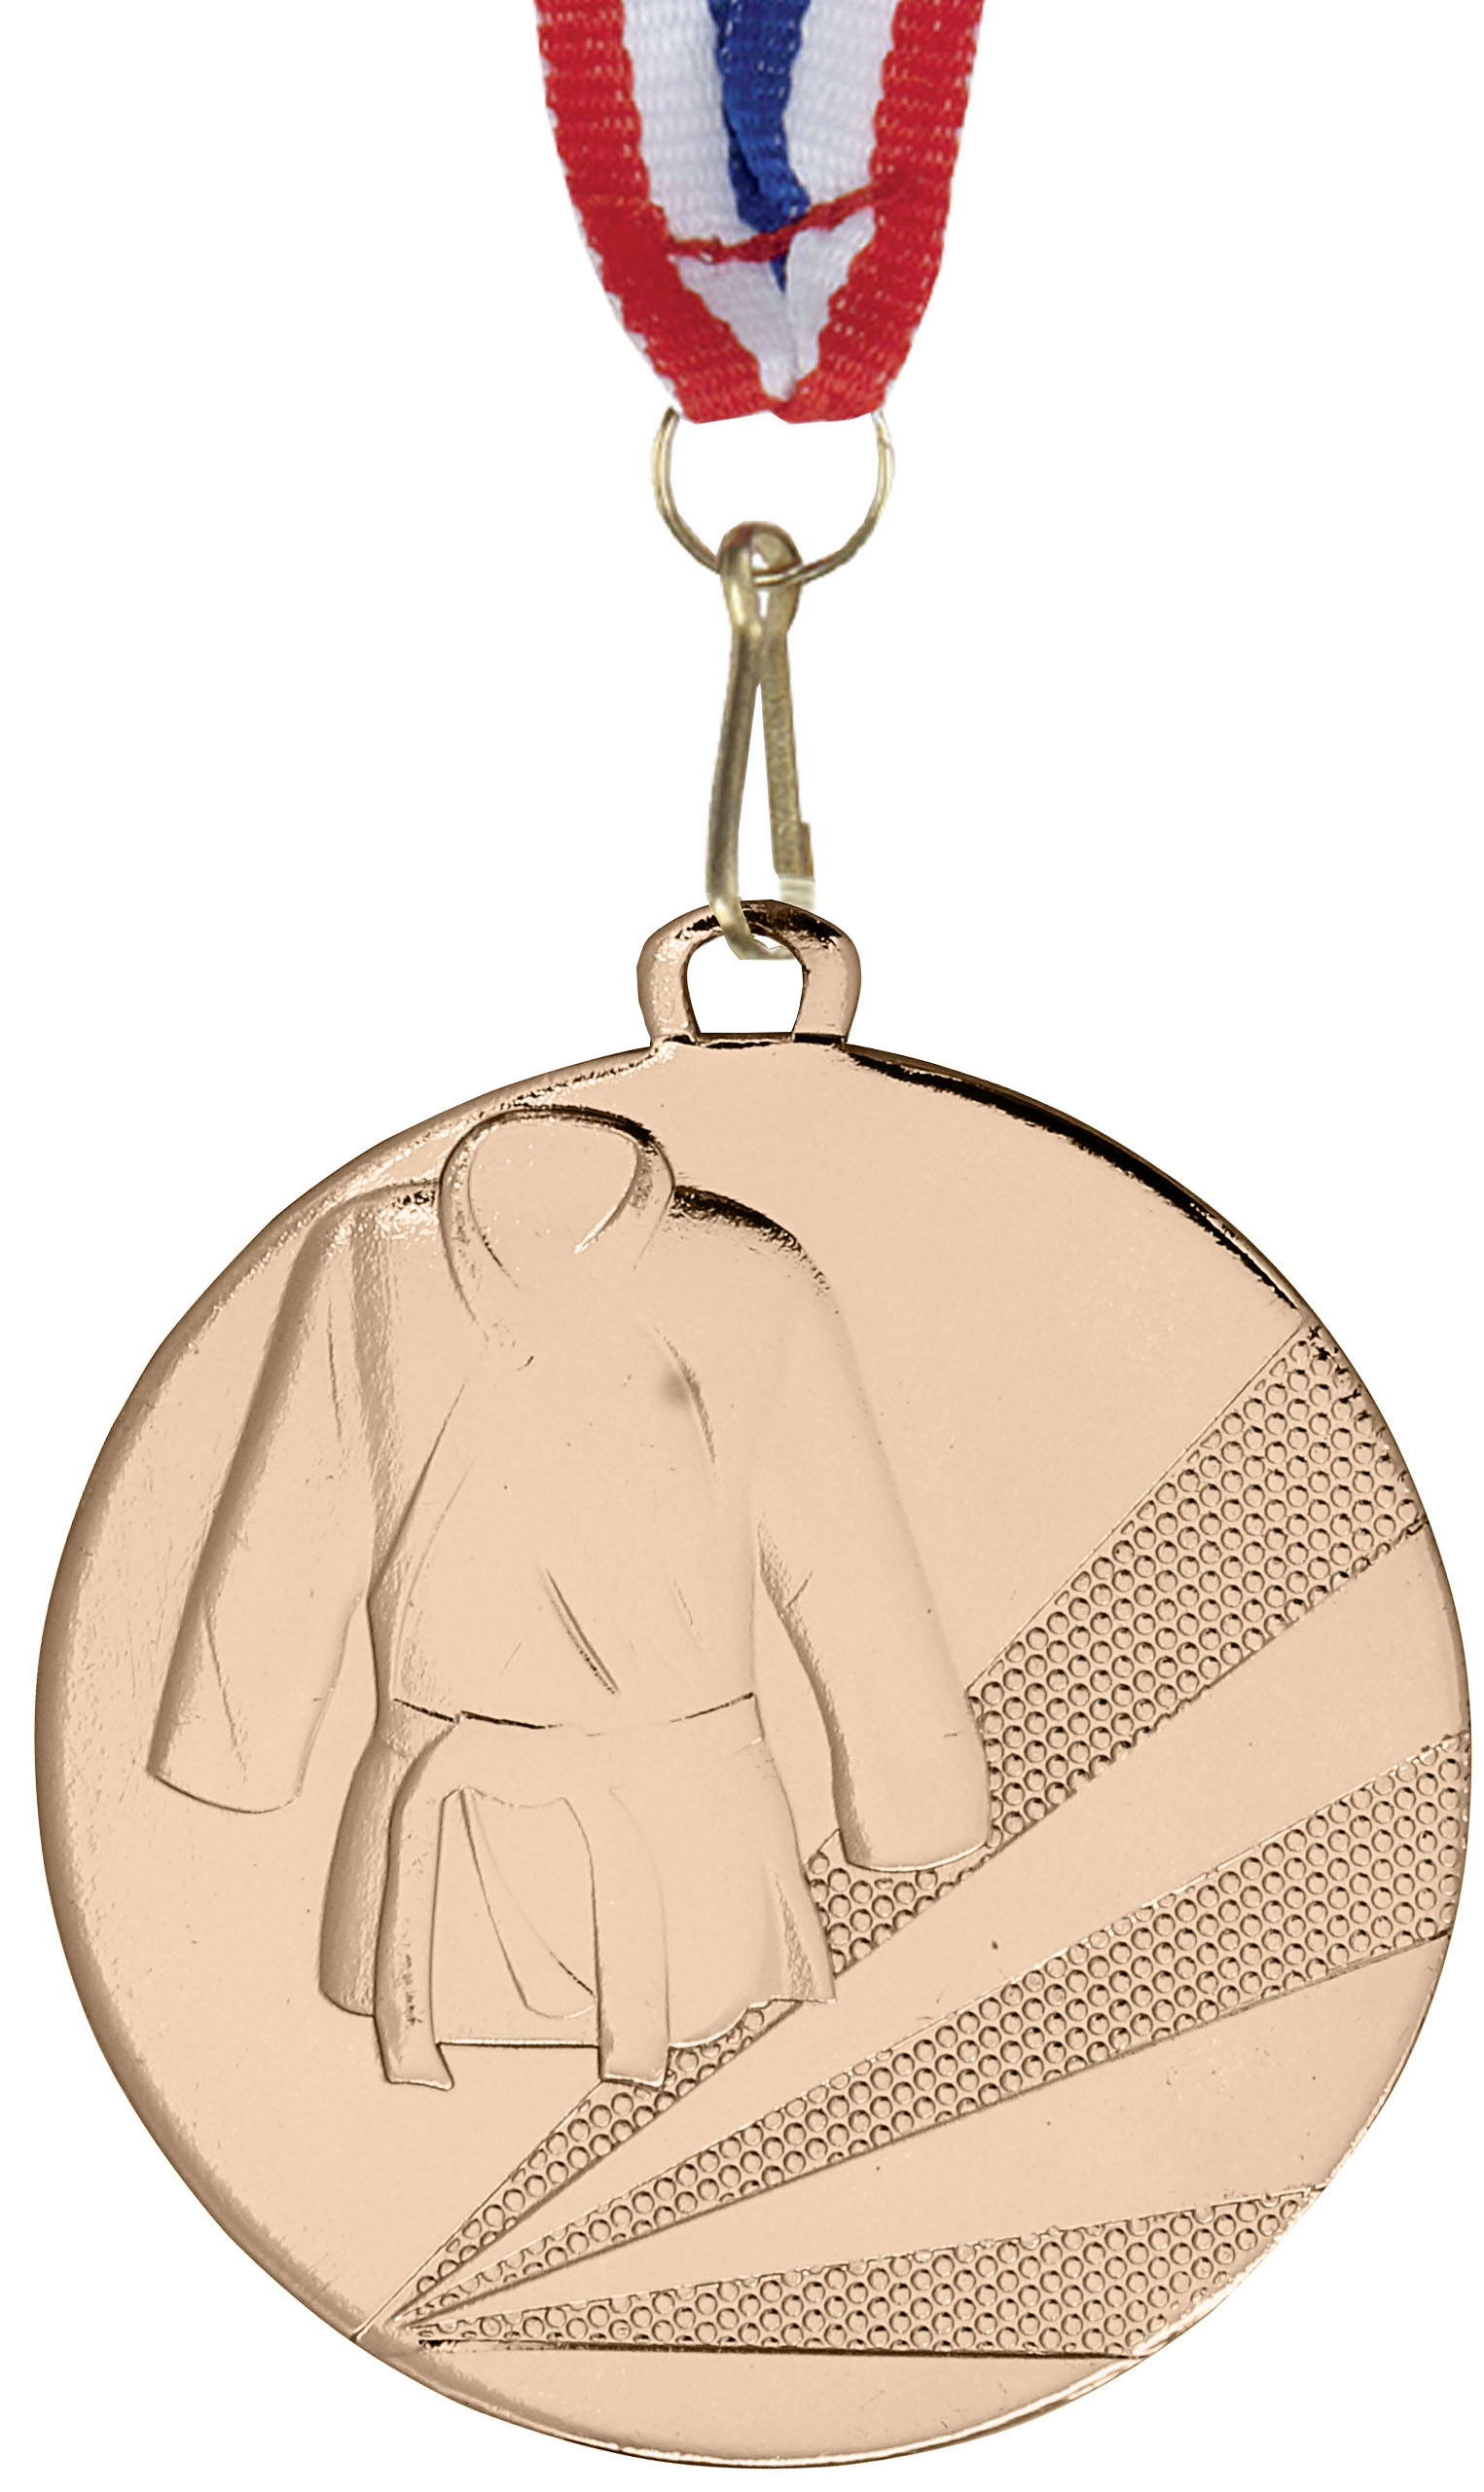 KARATE MEDAL 50mm EMBOSSED TOP QUALITY GOLD SILVER BRONZE FREE RIBBON 